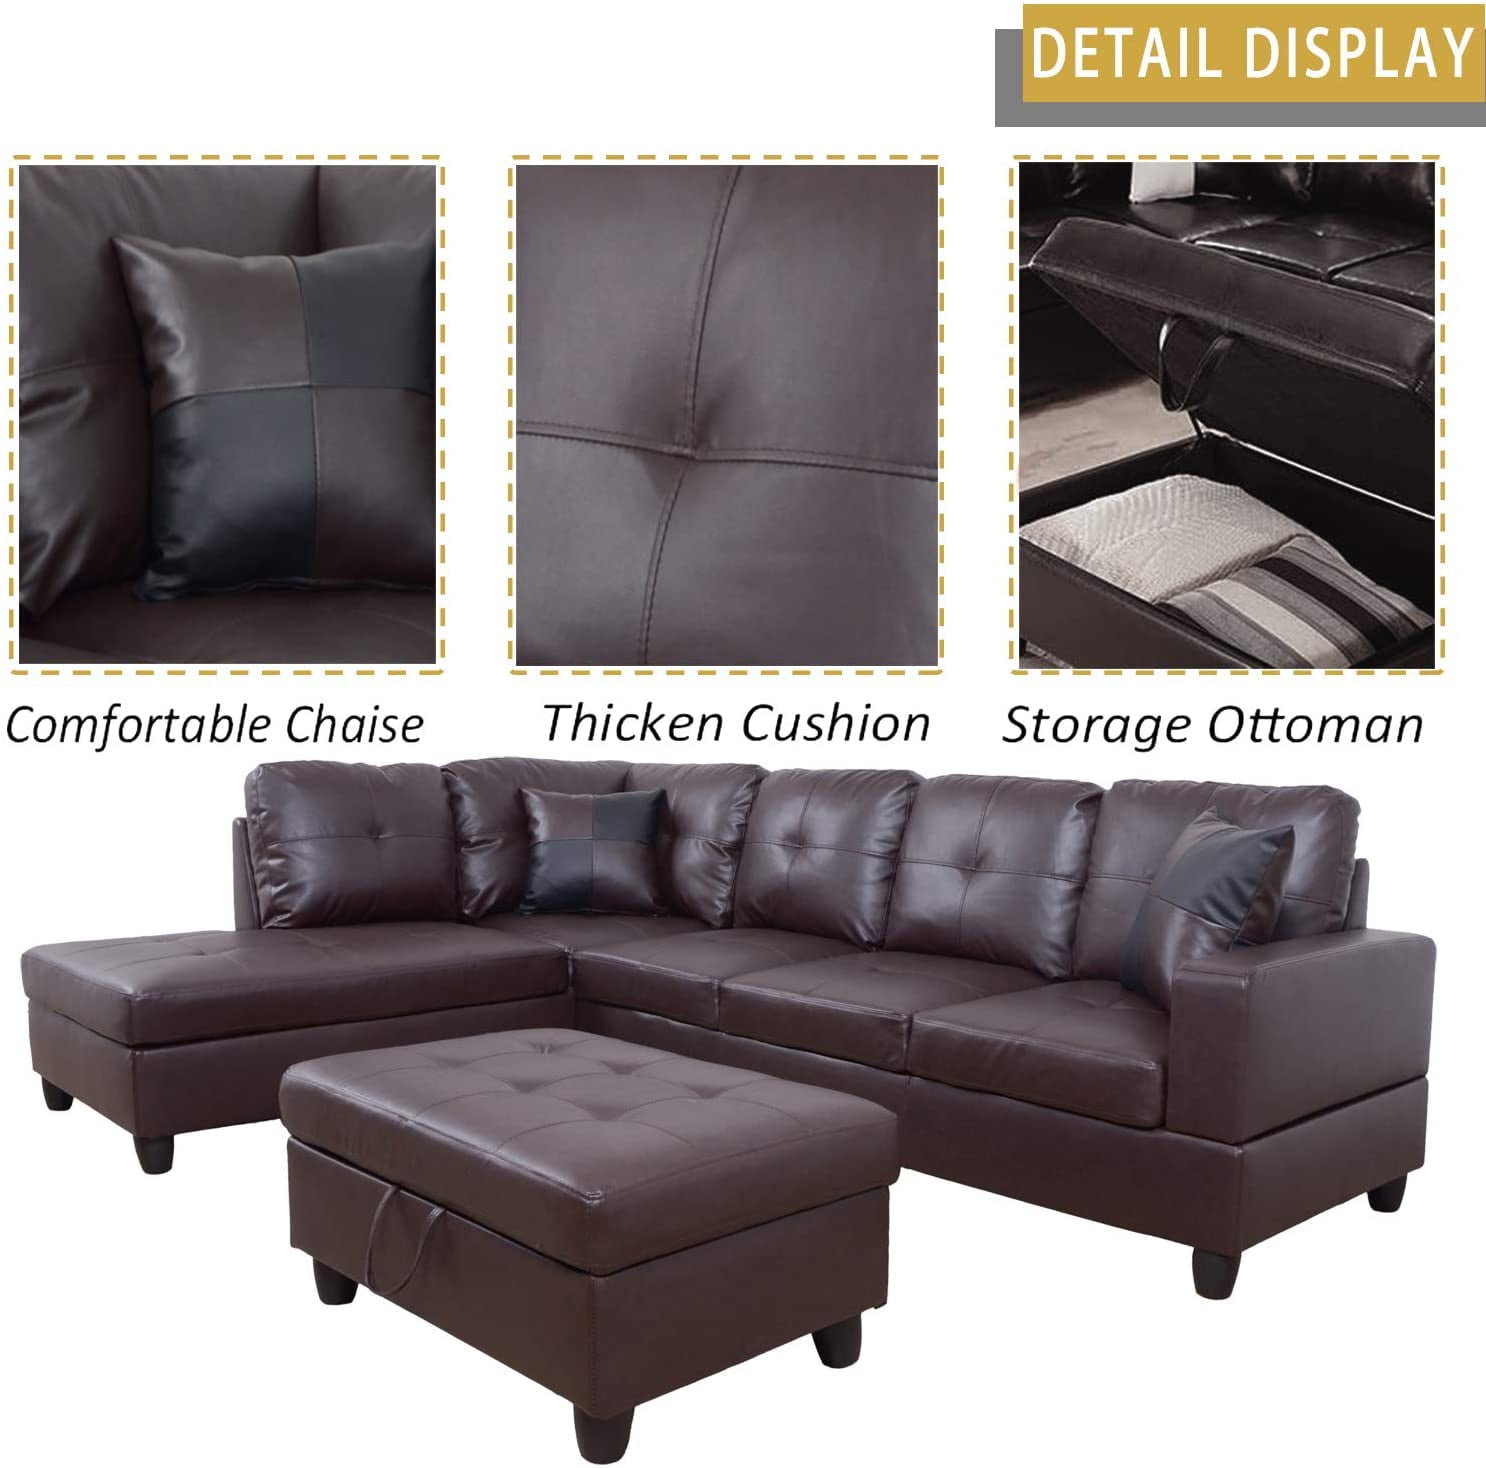 Darie Contemporary Brown Bonded Leather Sectional Sofa Living Room Set w Ottoman 